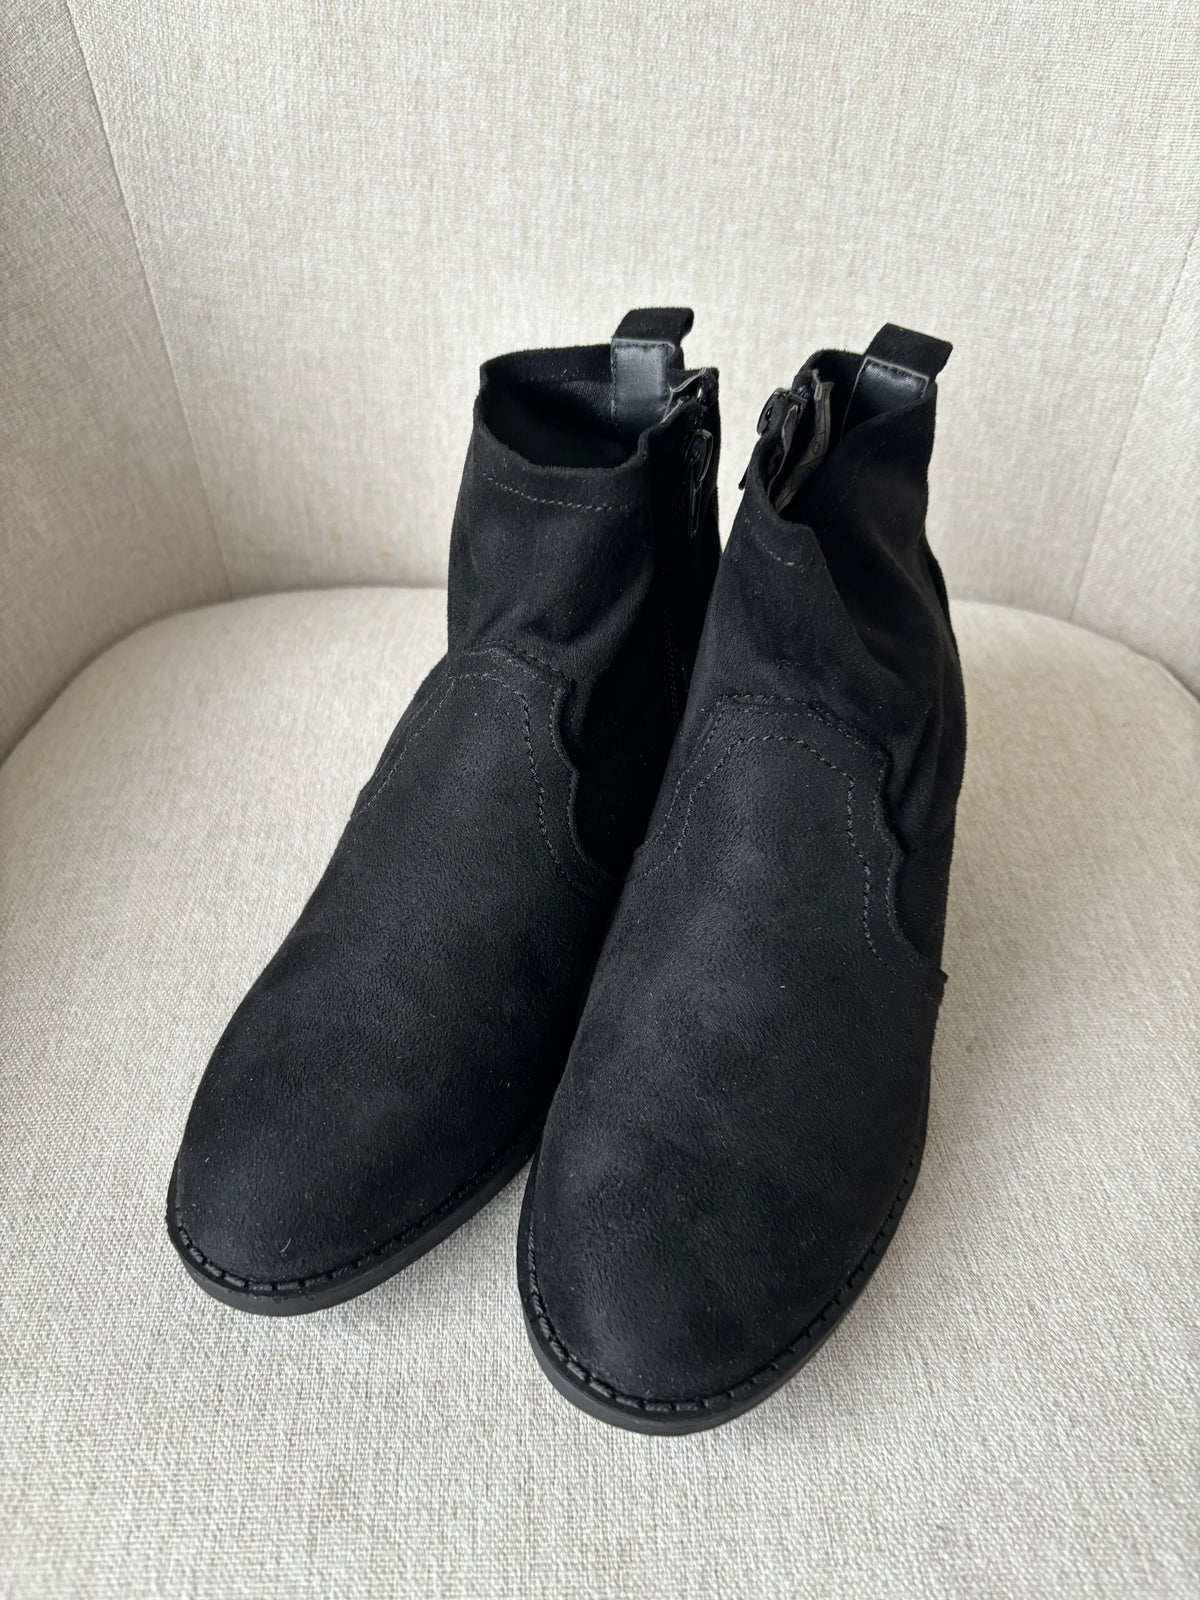 Black Suede Boots by CityWalk size 3